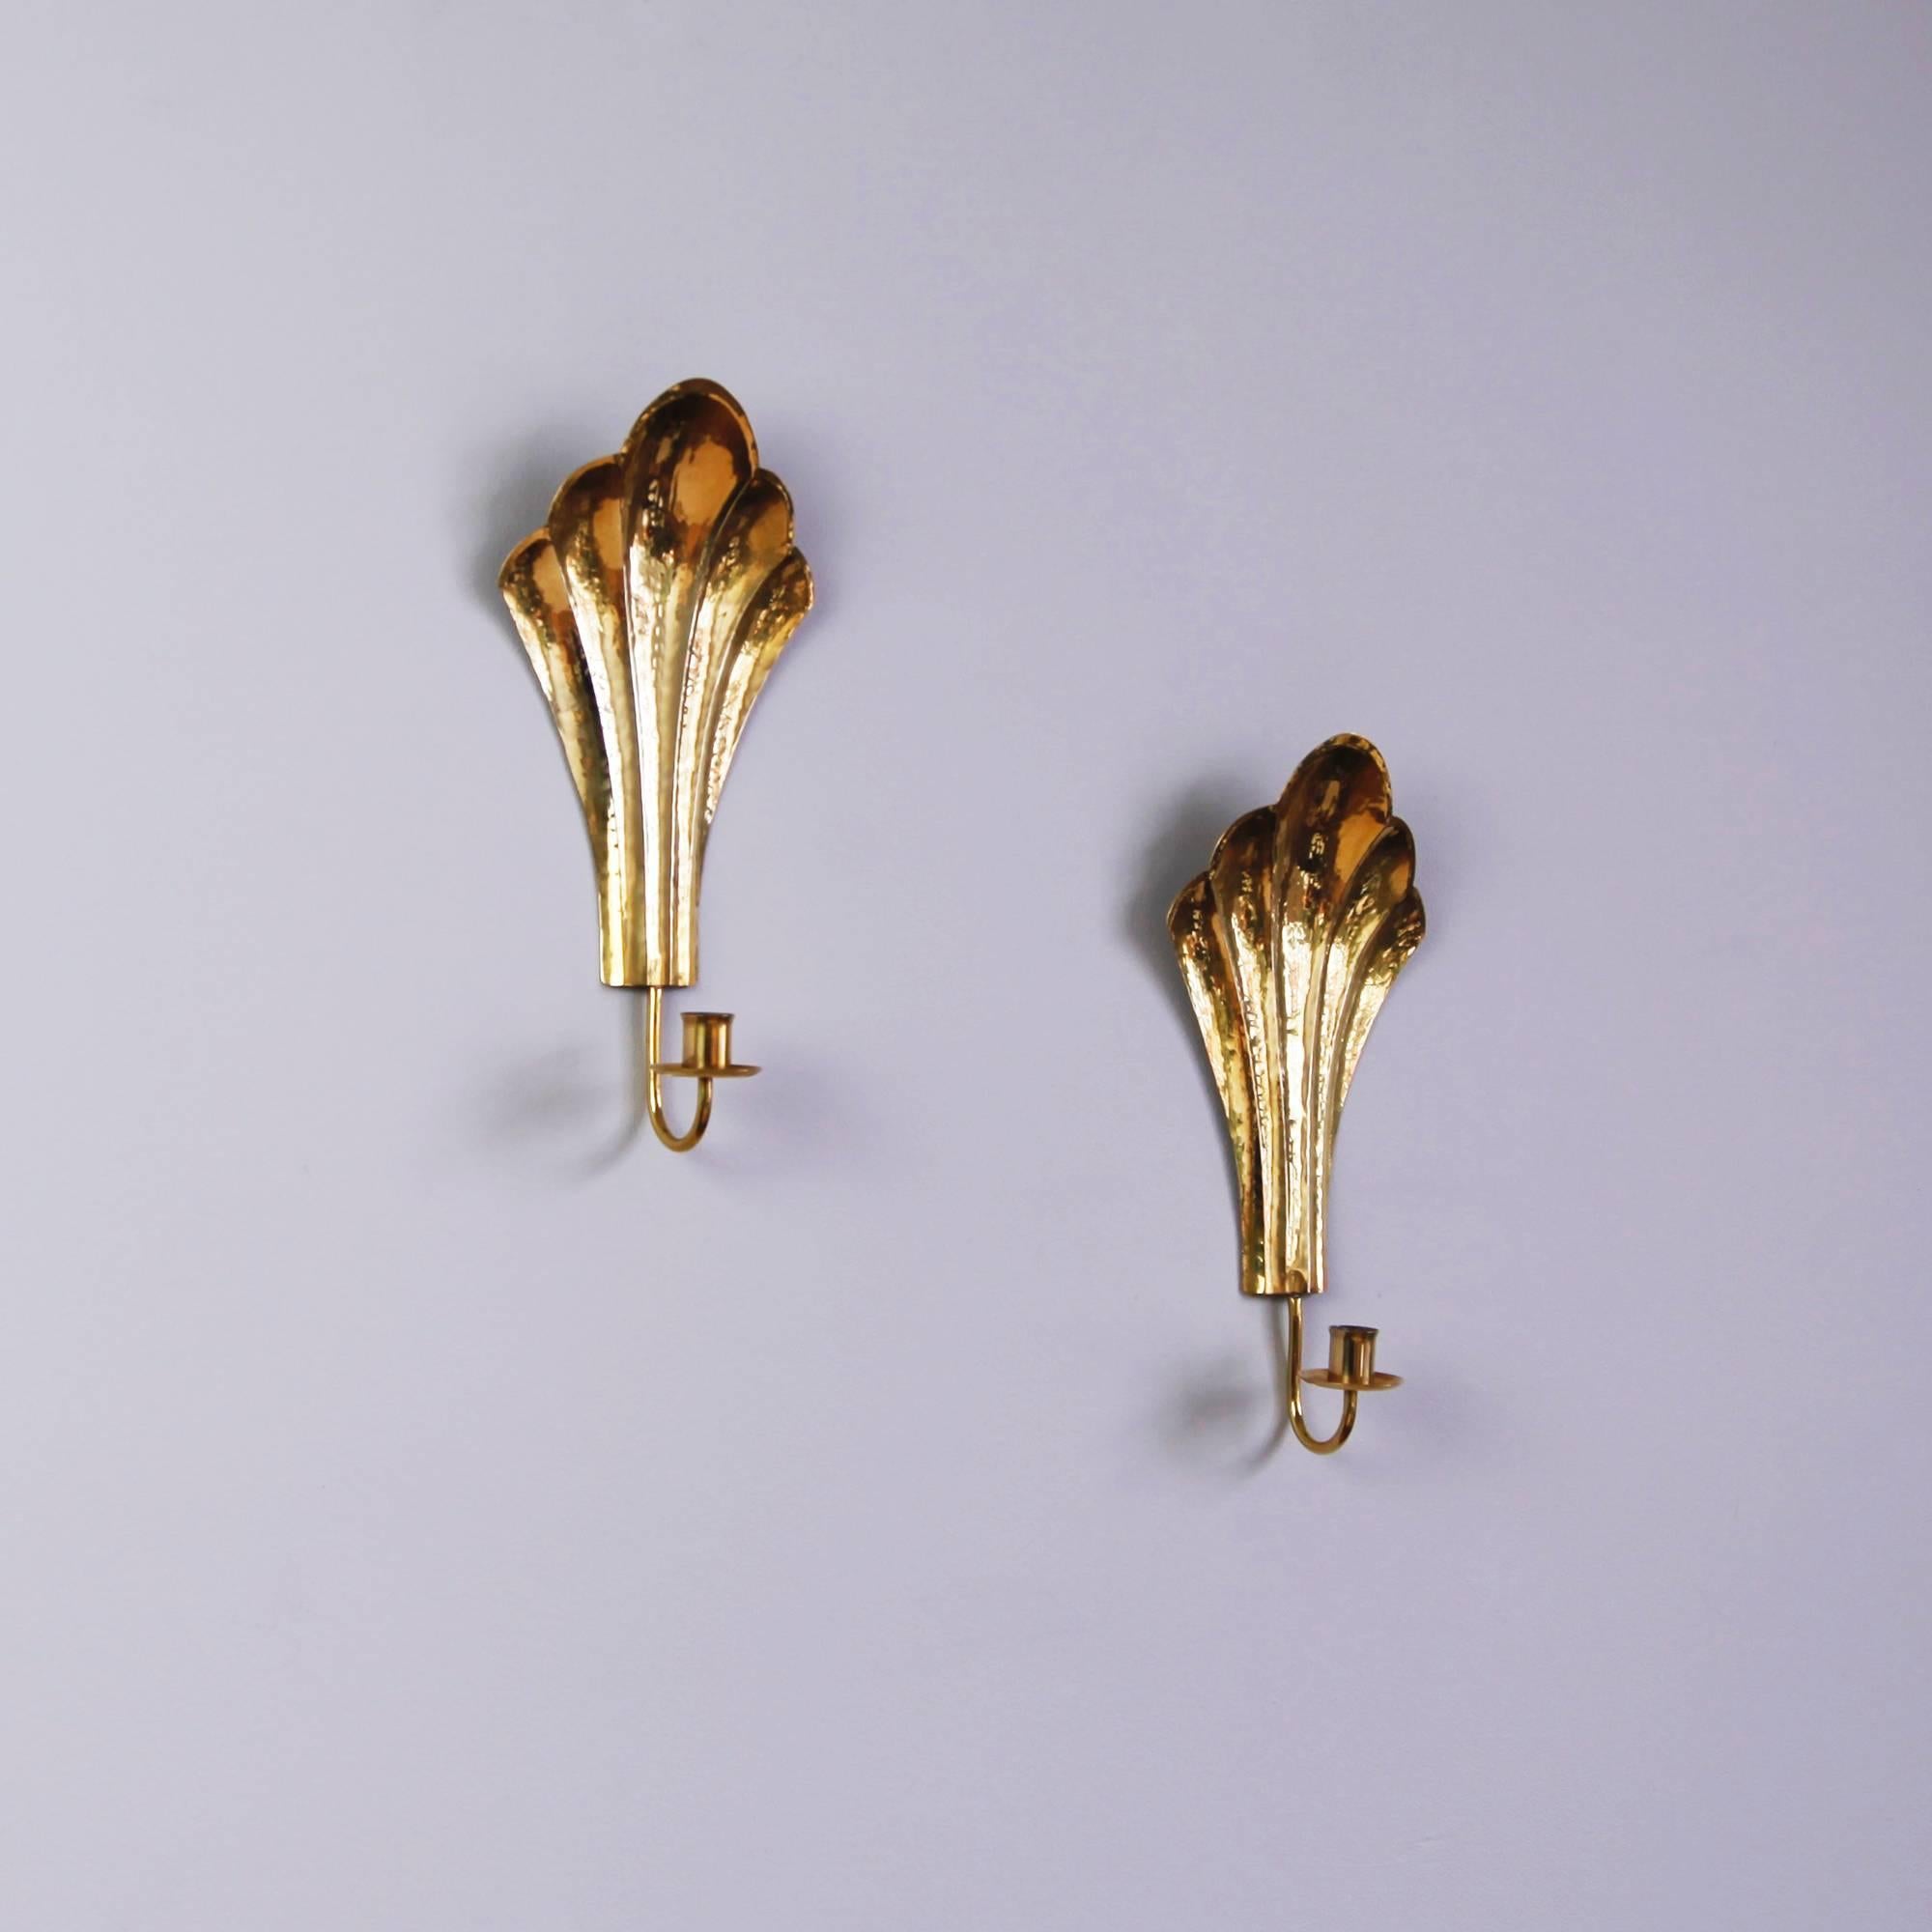 A graceful pair of Swedish Art Deco candle sconces in a warm, hammered brass. Stamped 